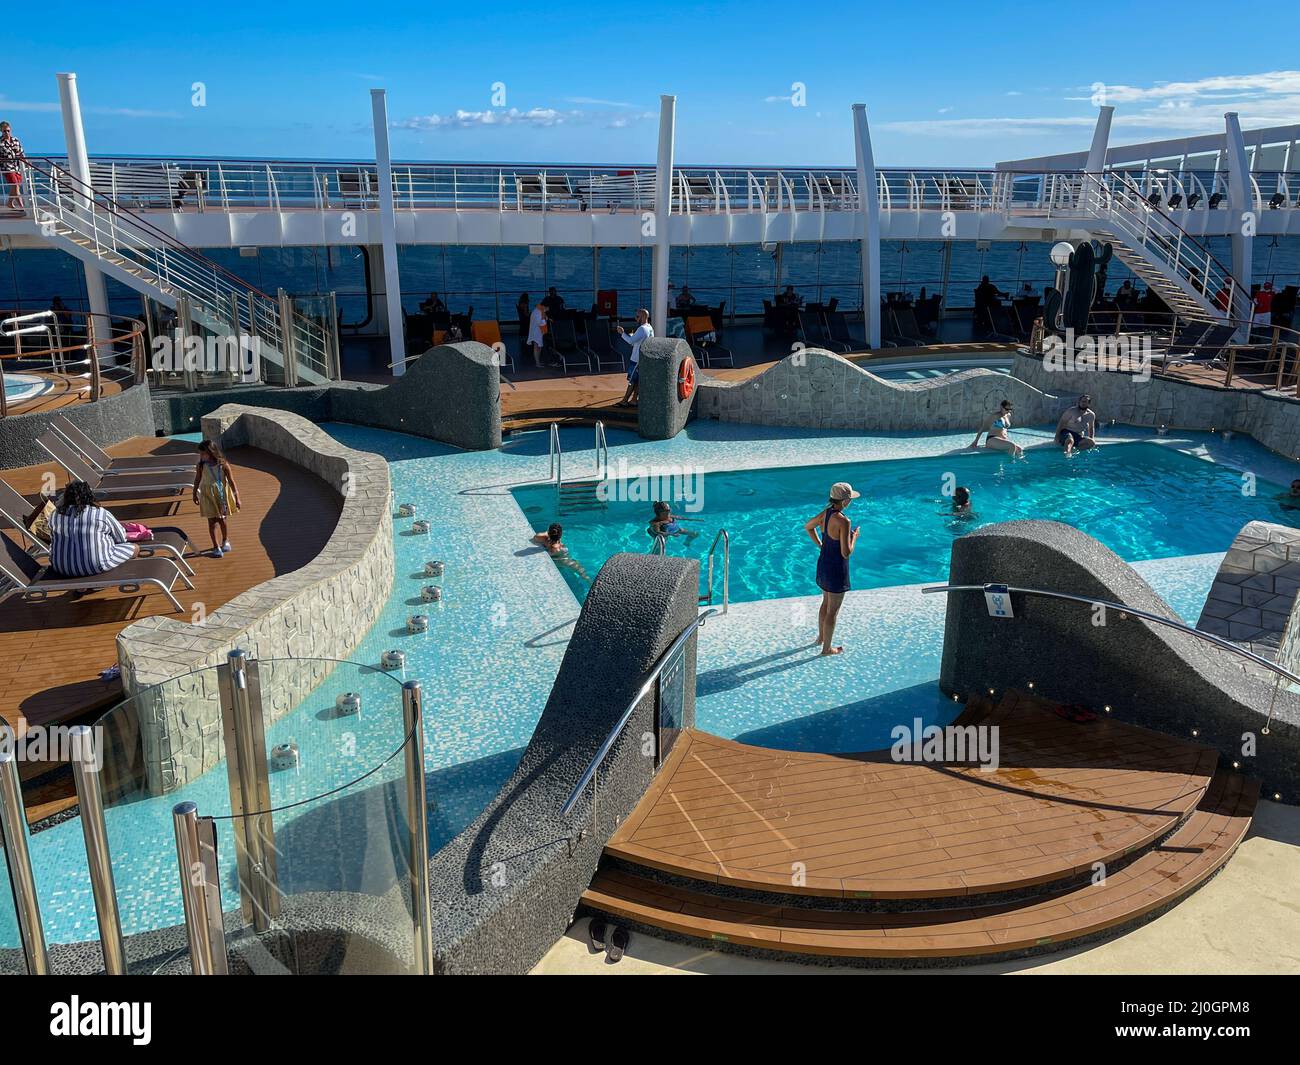 Orlando, FL USA - October 11, 2021:  The main swimming pool area on the MSC Cruise Ship Divina in Port Canaveral, Florida., Stock Photo